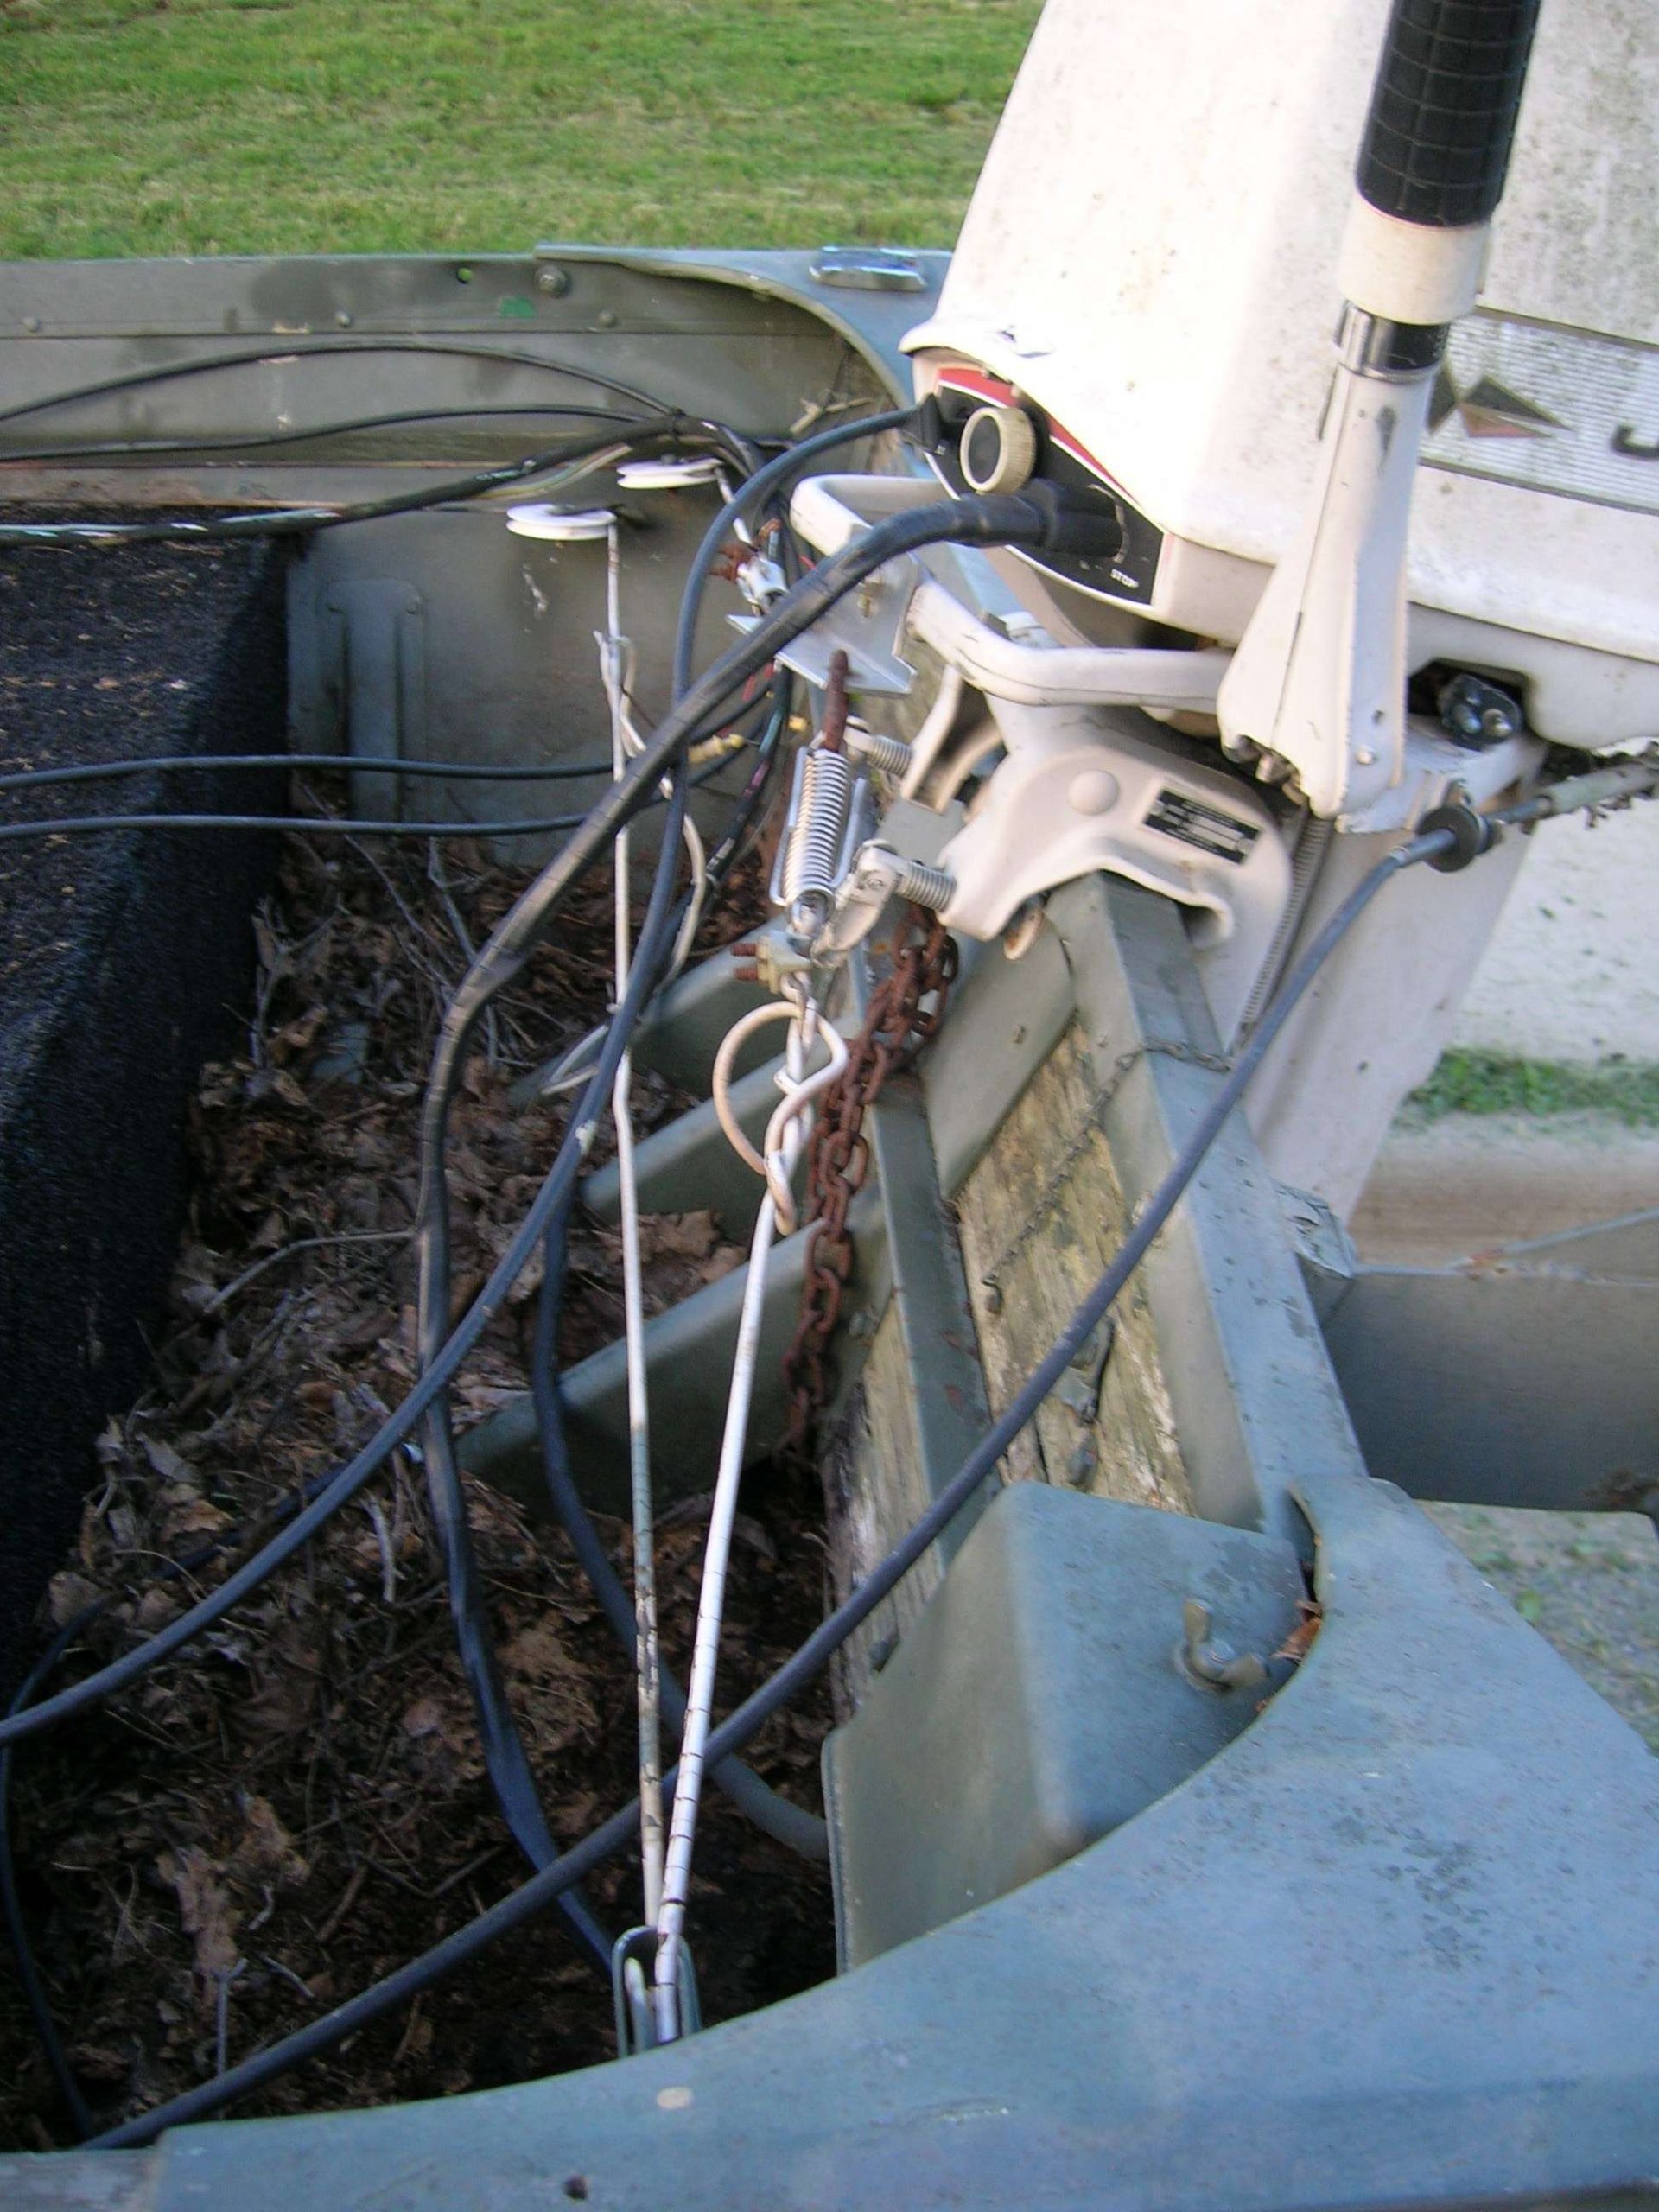 Here's a closer look at the old-school cable-steer system. Giant hot mess...